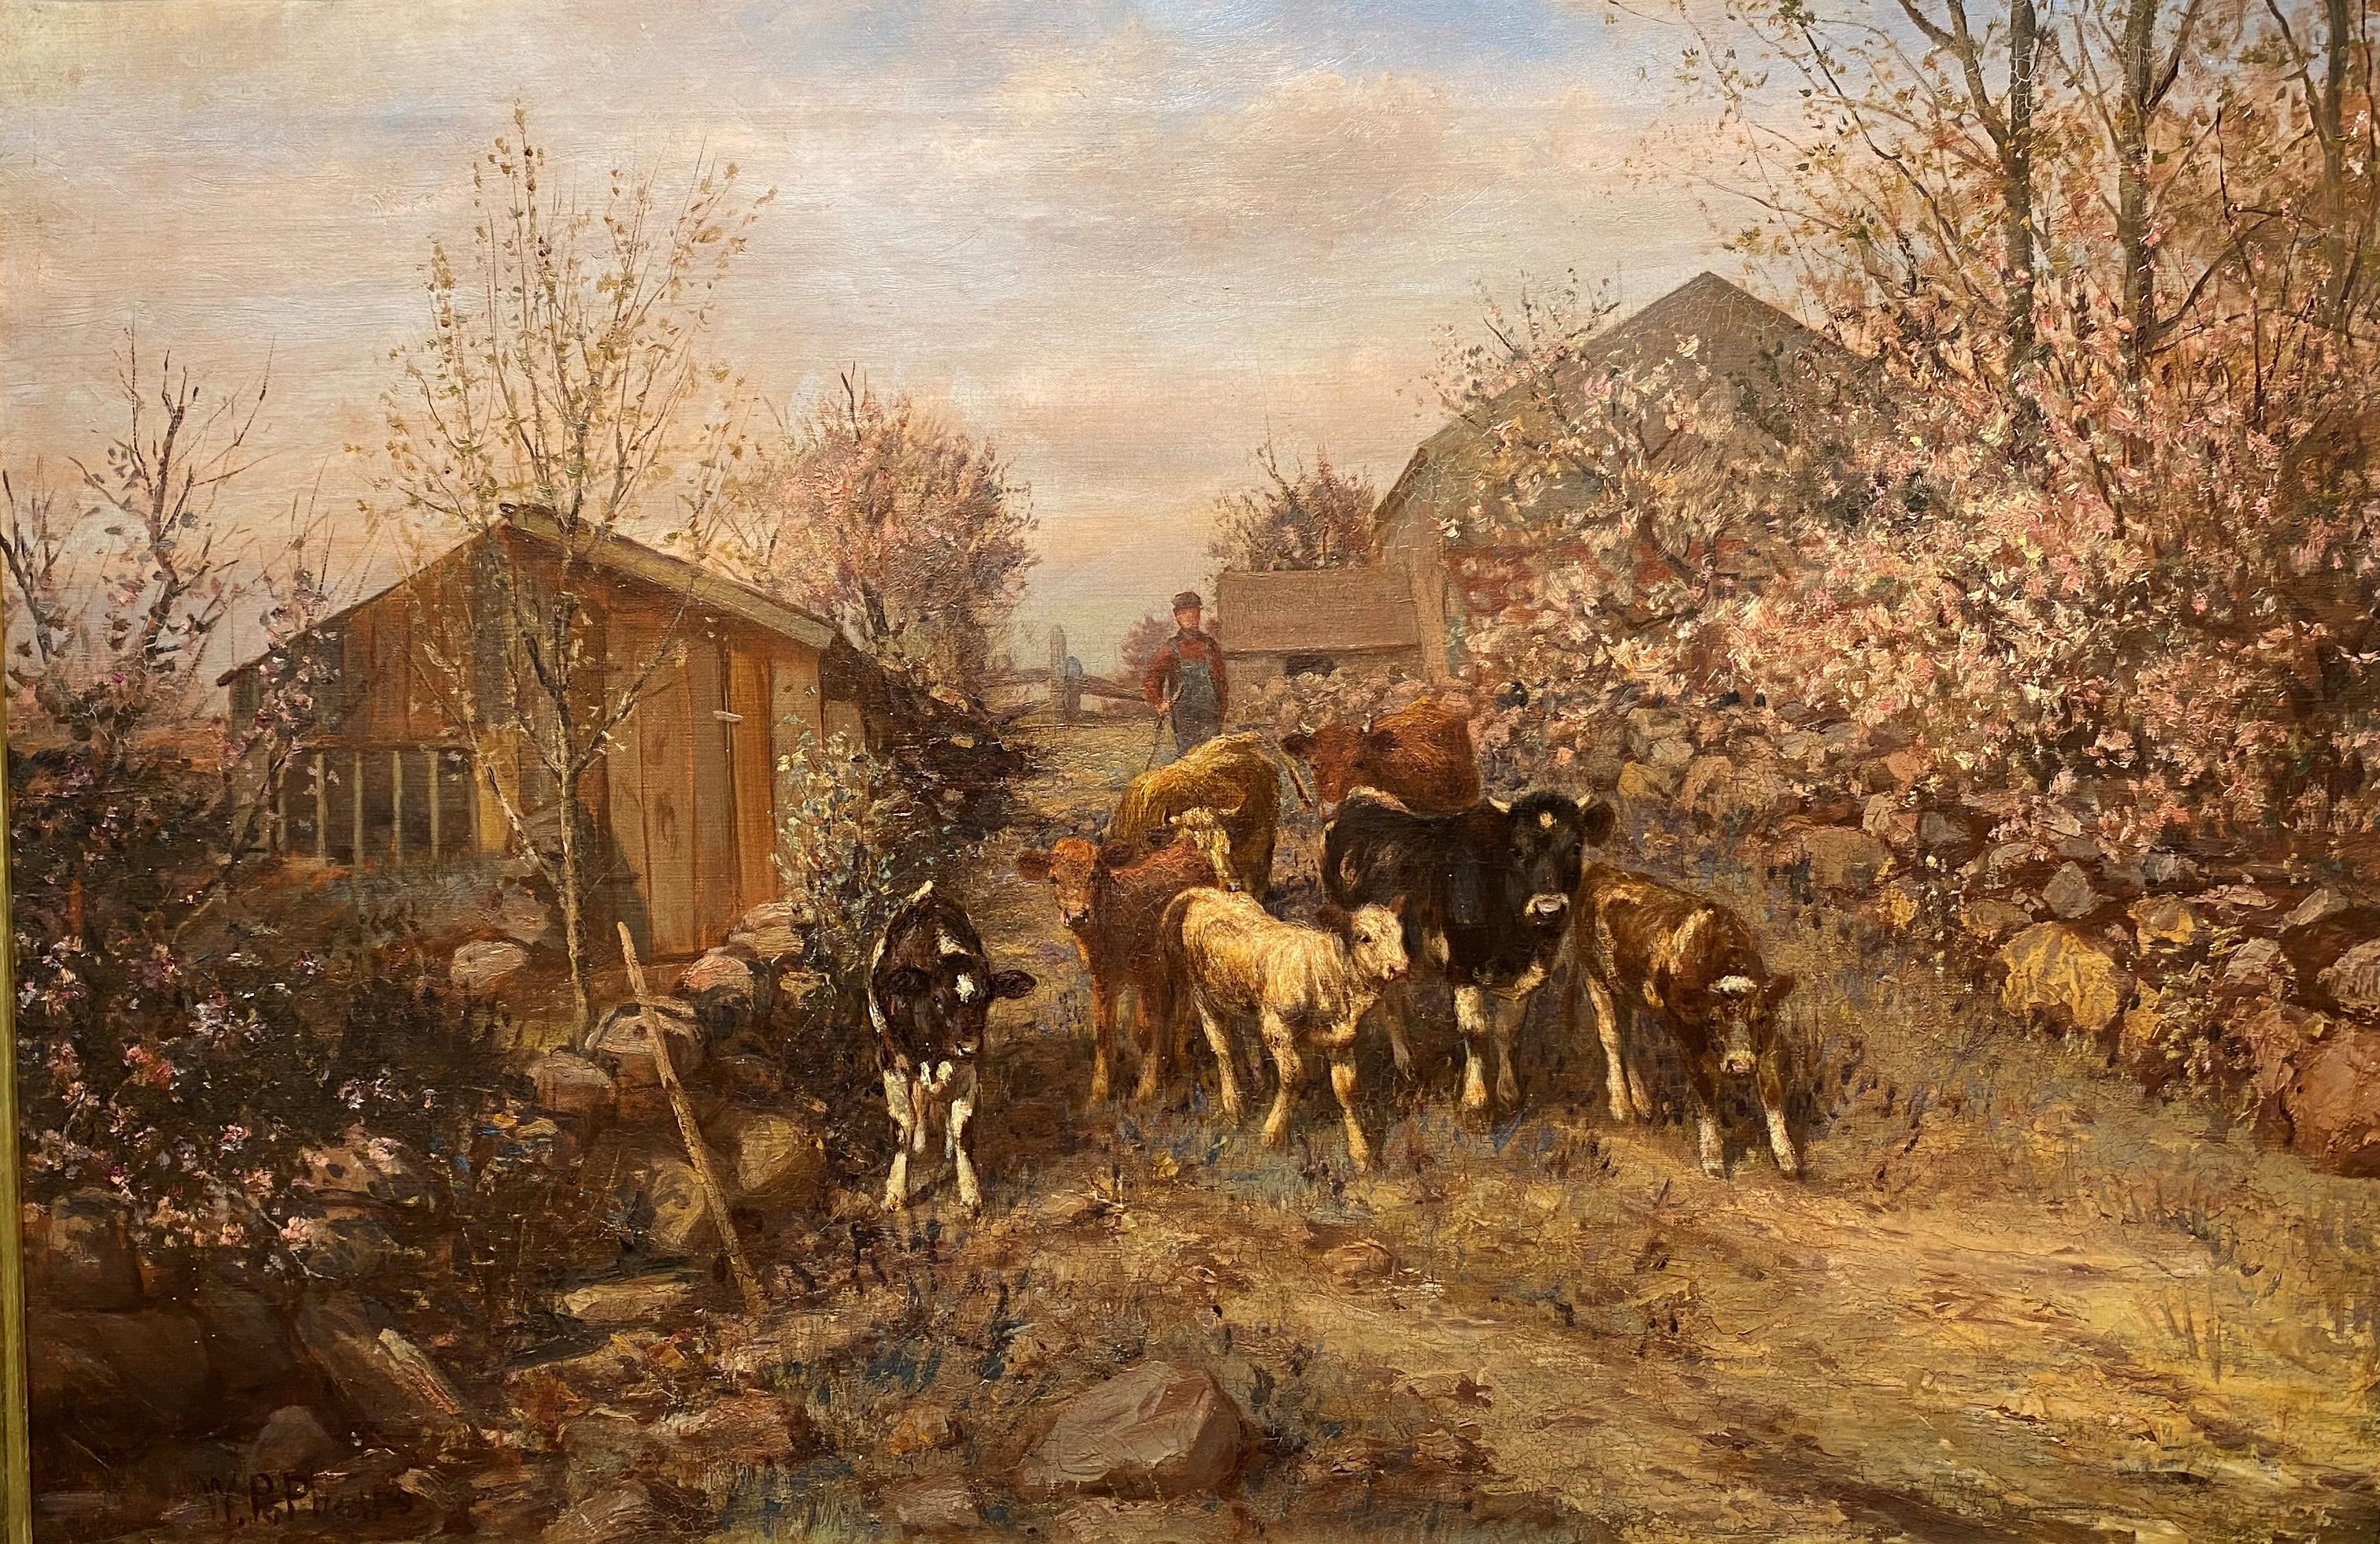 Landscape with Farmer & Cows - Painting by William Preston Phelps